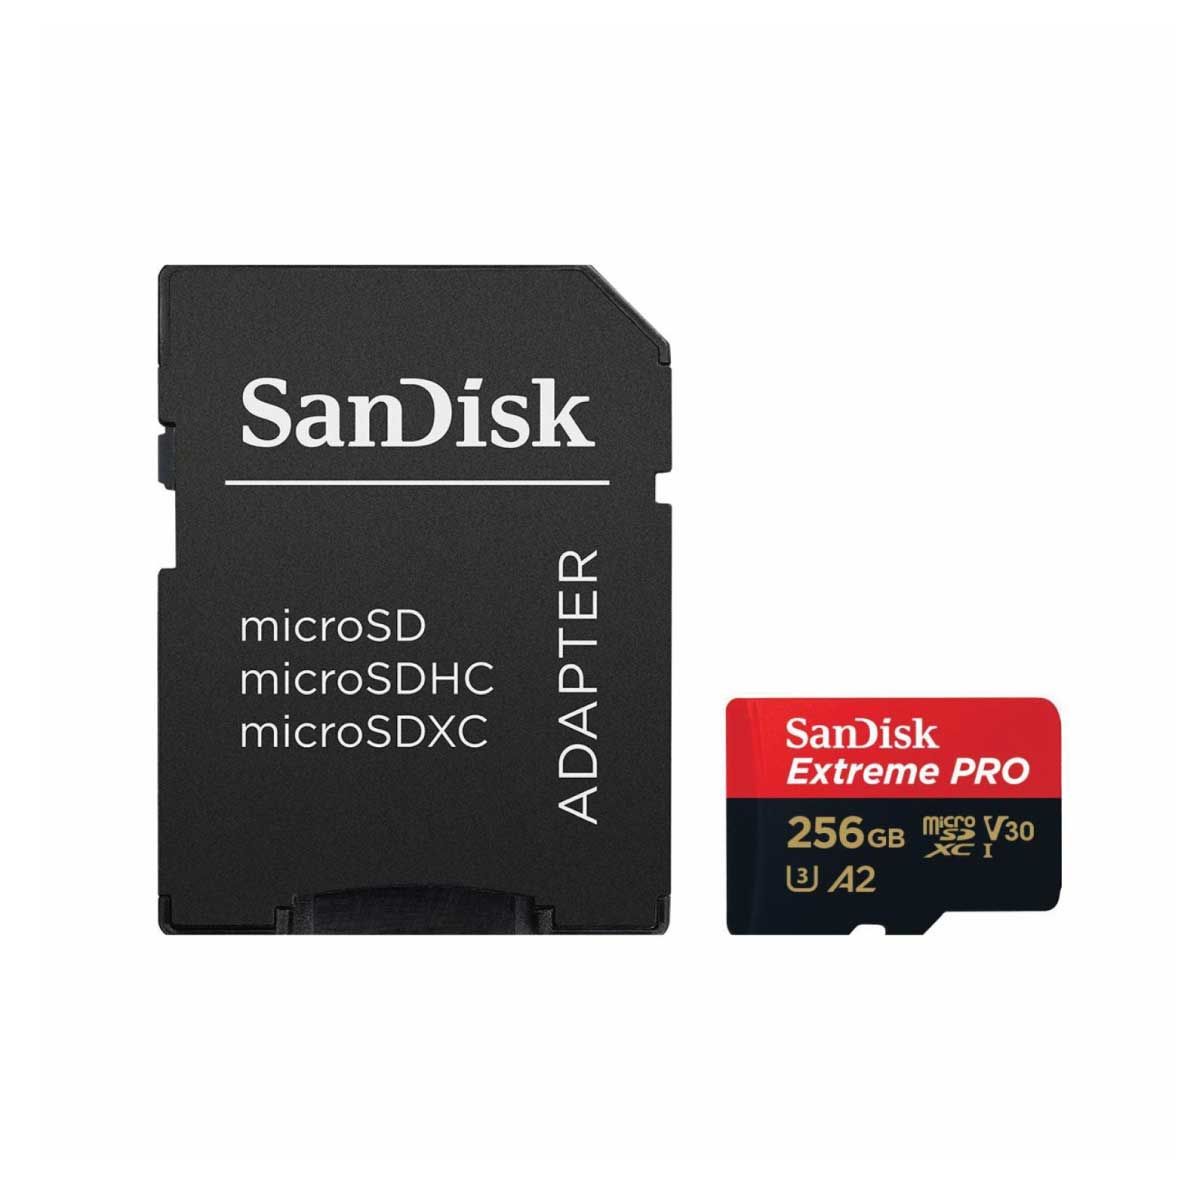 SANDISK MICRO SD CARD Extreme Pro 256 GB รุ่น SDSQXCD-256G-GN6MA